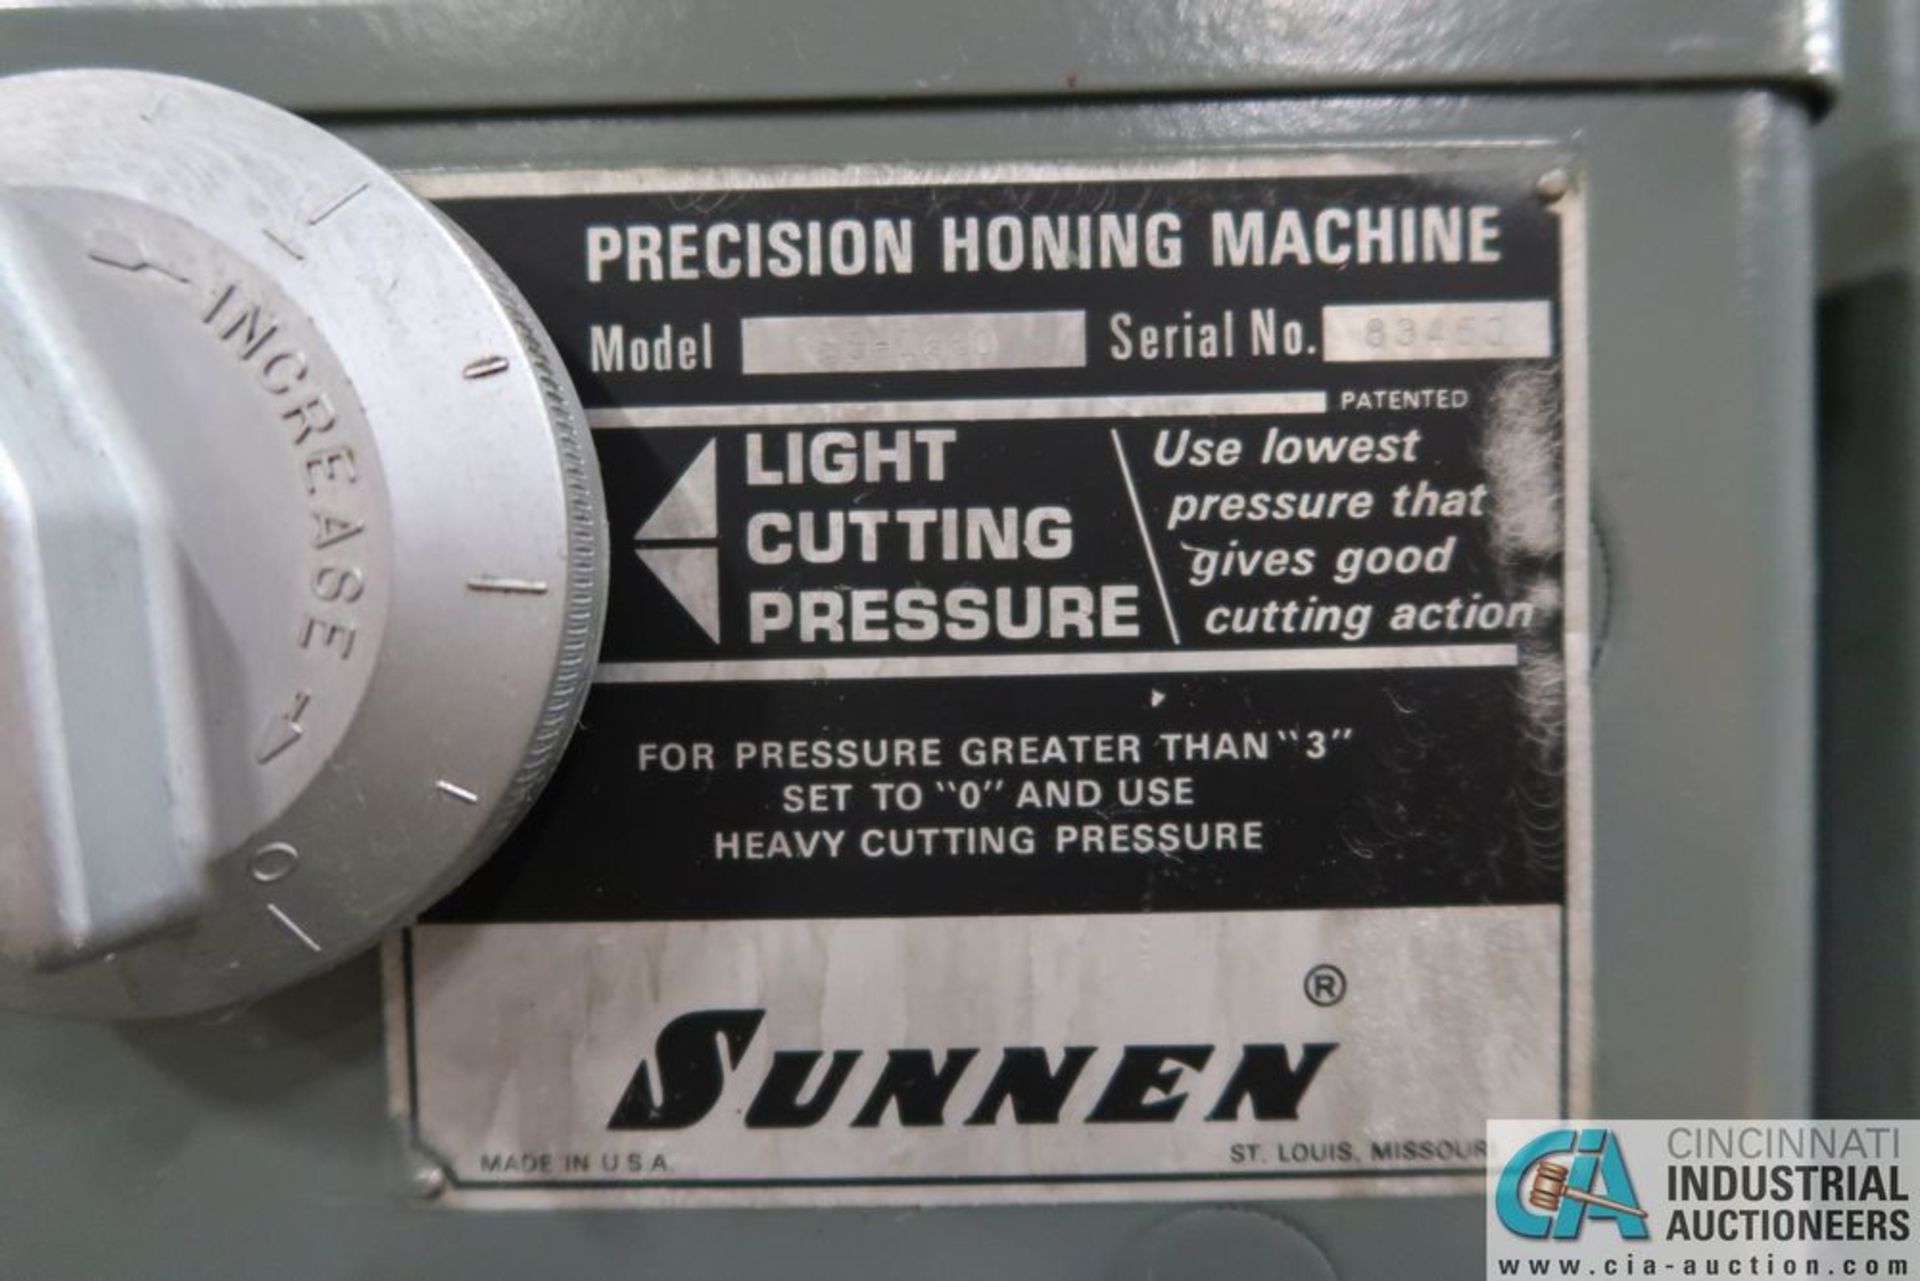 SUNNEN MODEL MBB-1660 HONE; S/N 83450 **Loading Fee Due Industrial Movers $50.00 valid until 4/9** - Image 8 of 8